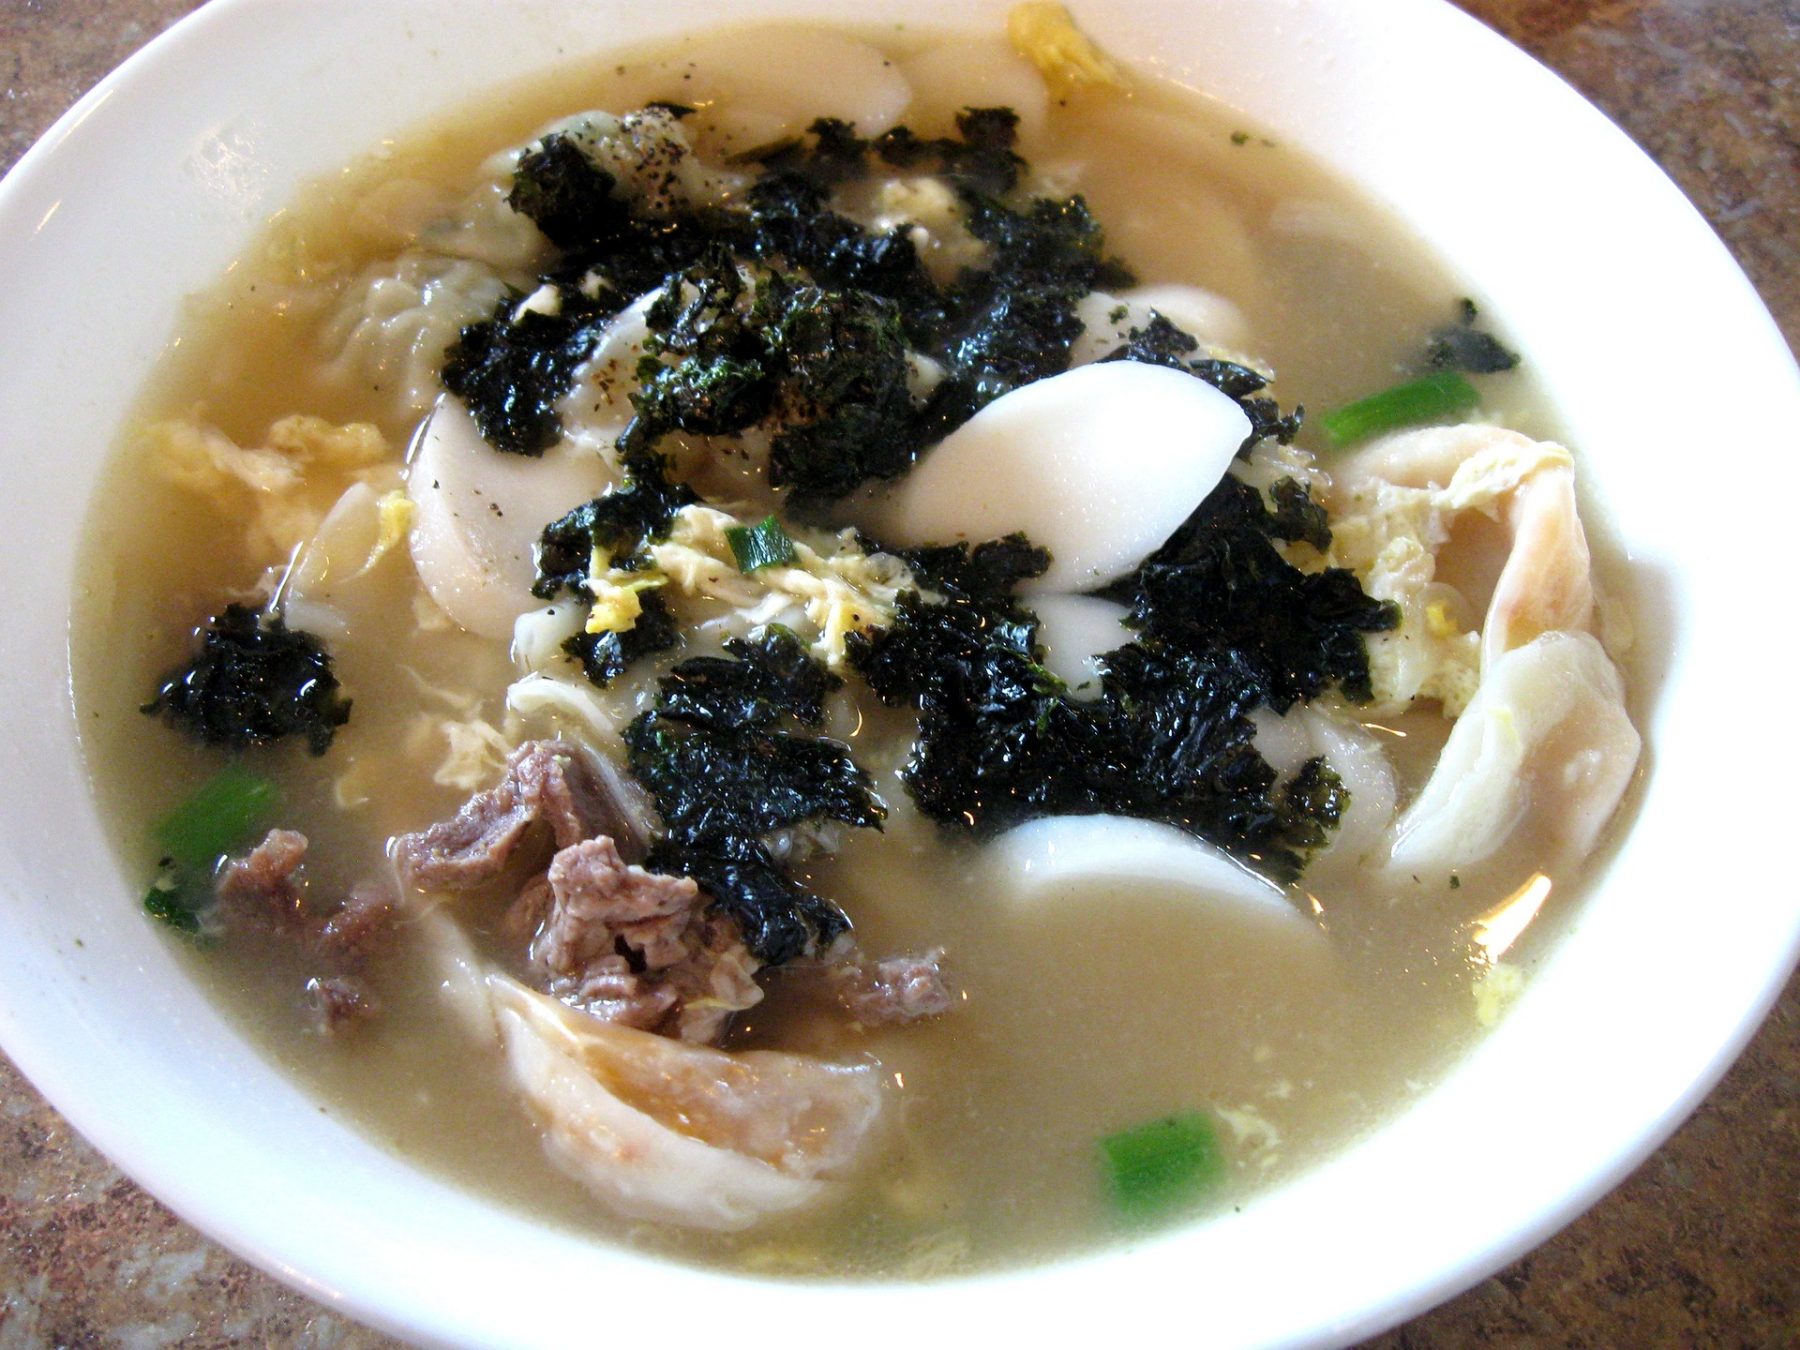 Image of ddukguk, a food eaten at a typical Korean New Year's celebration